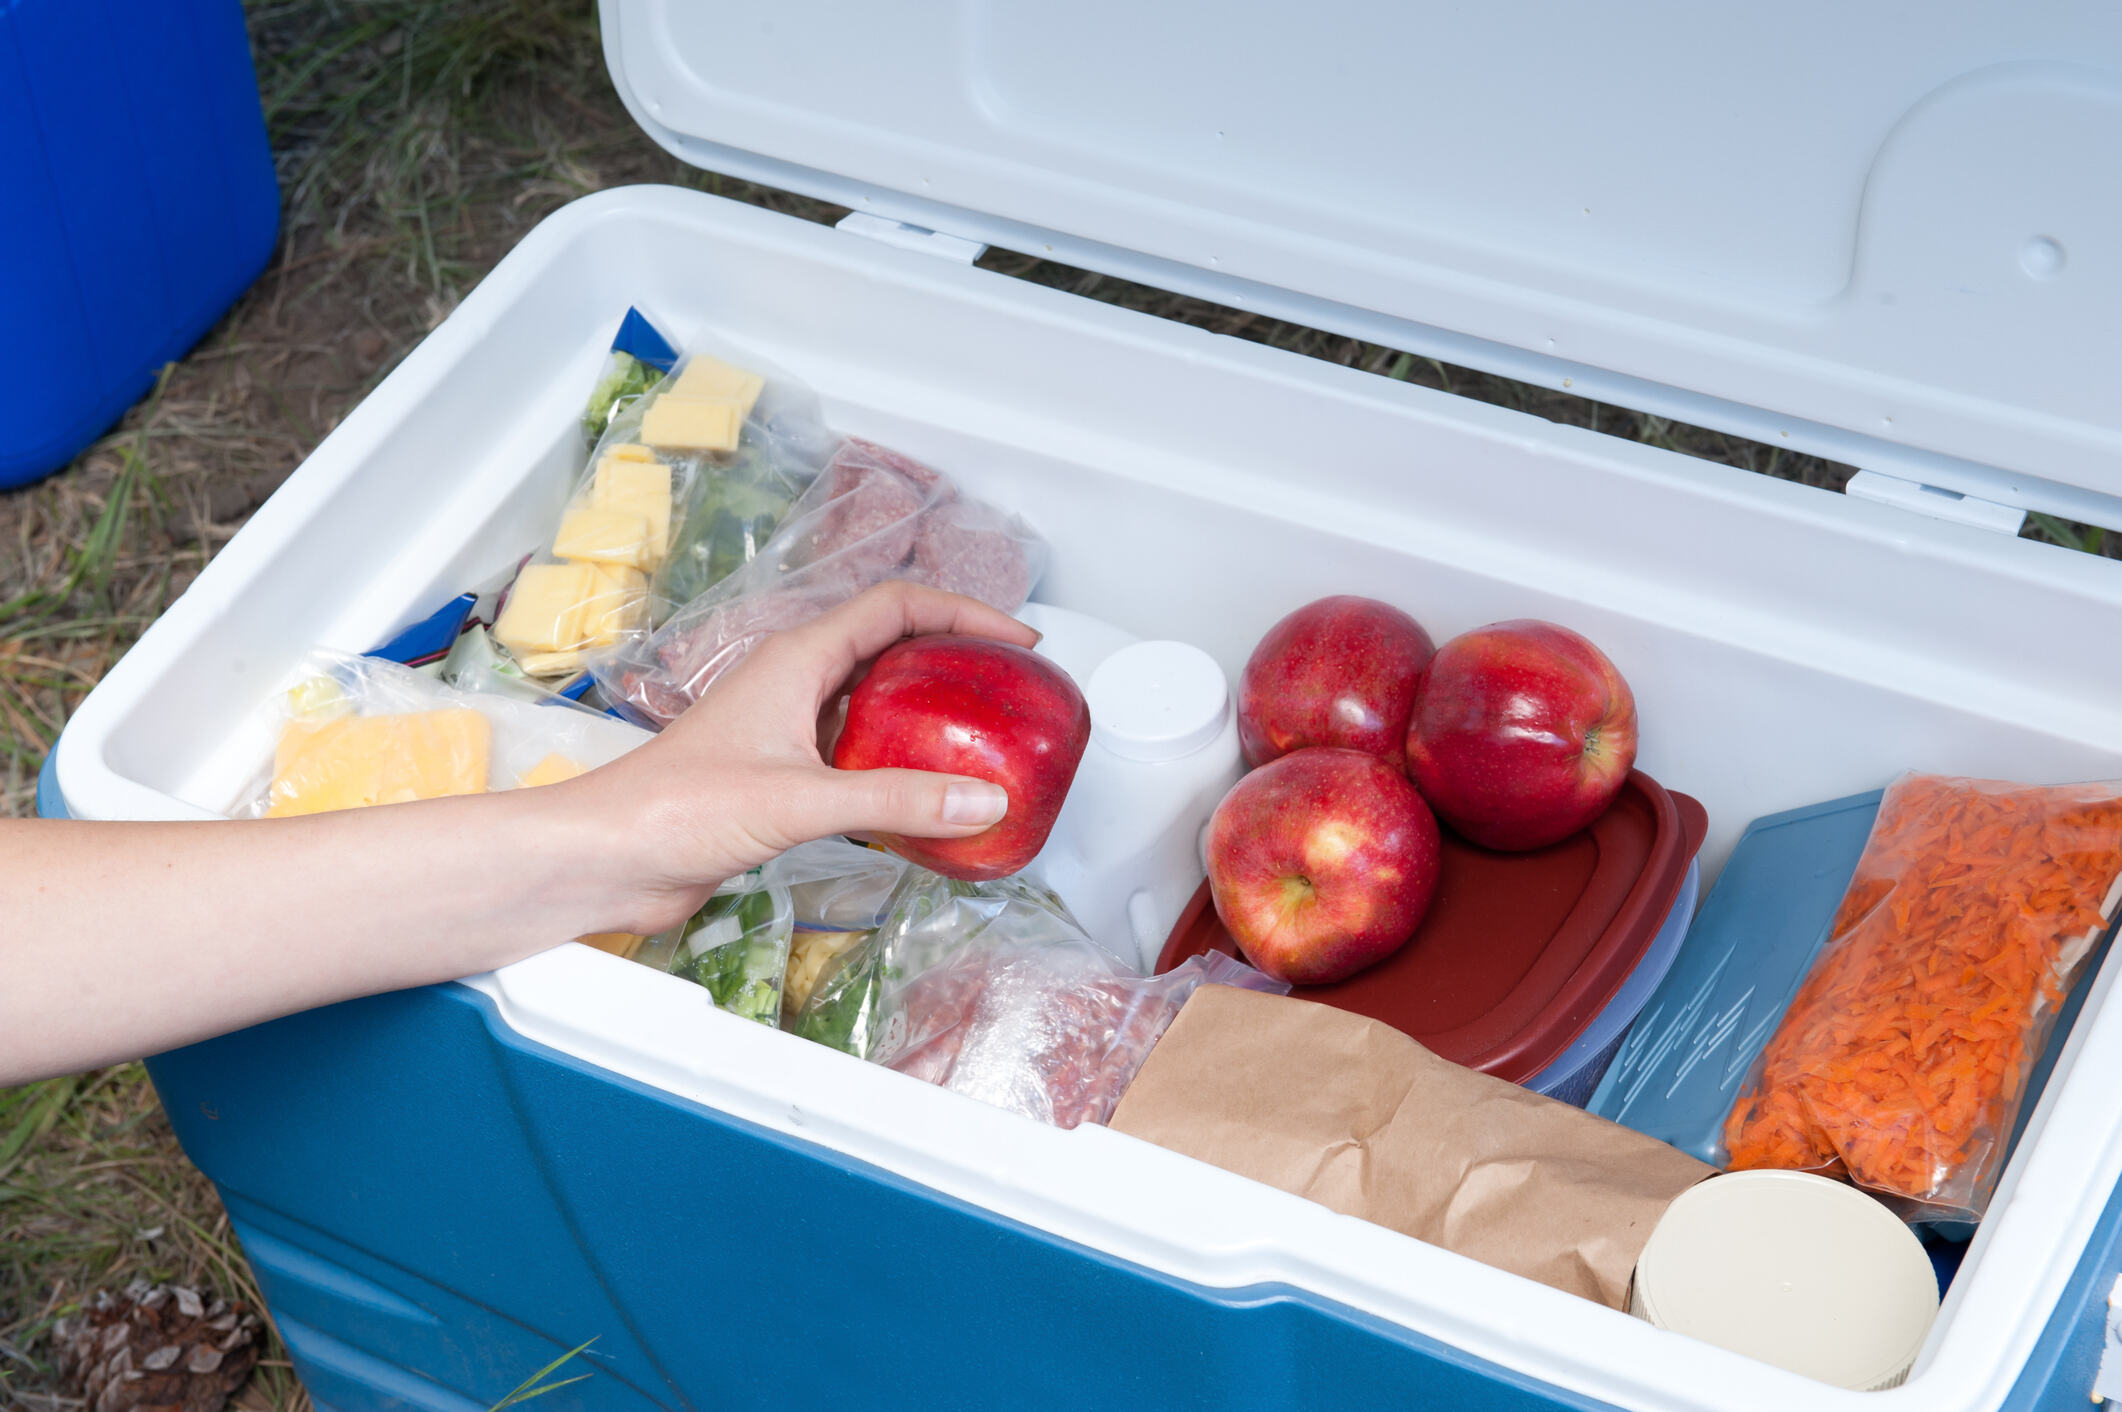 How To Keep Foods Cold At An Outdoor Picnic